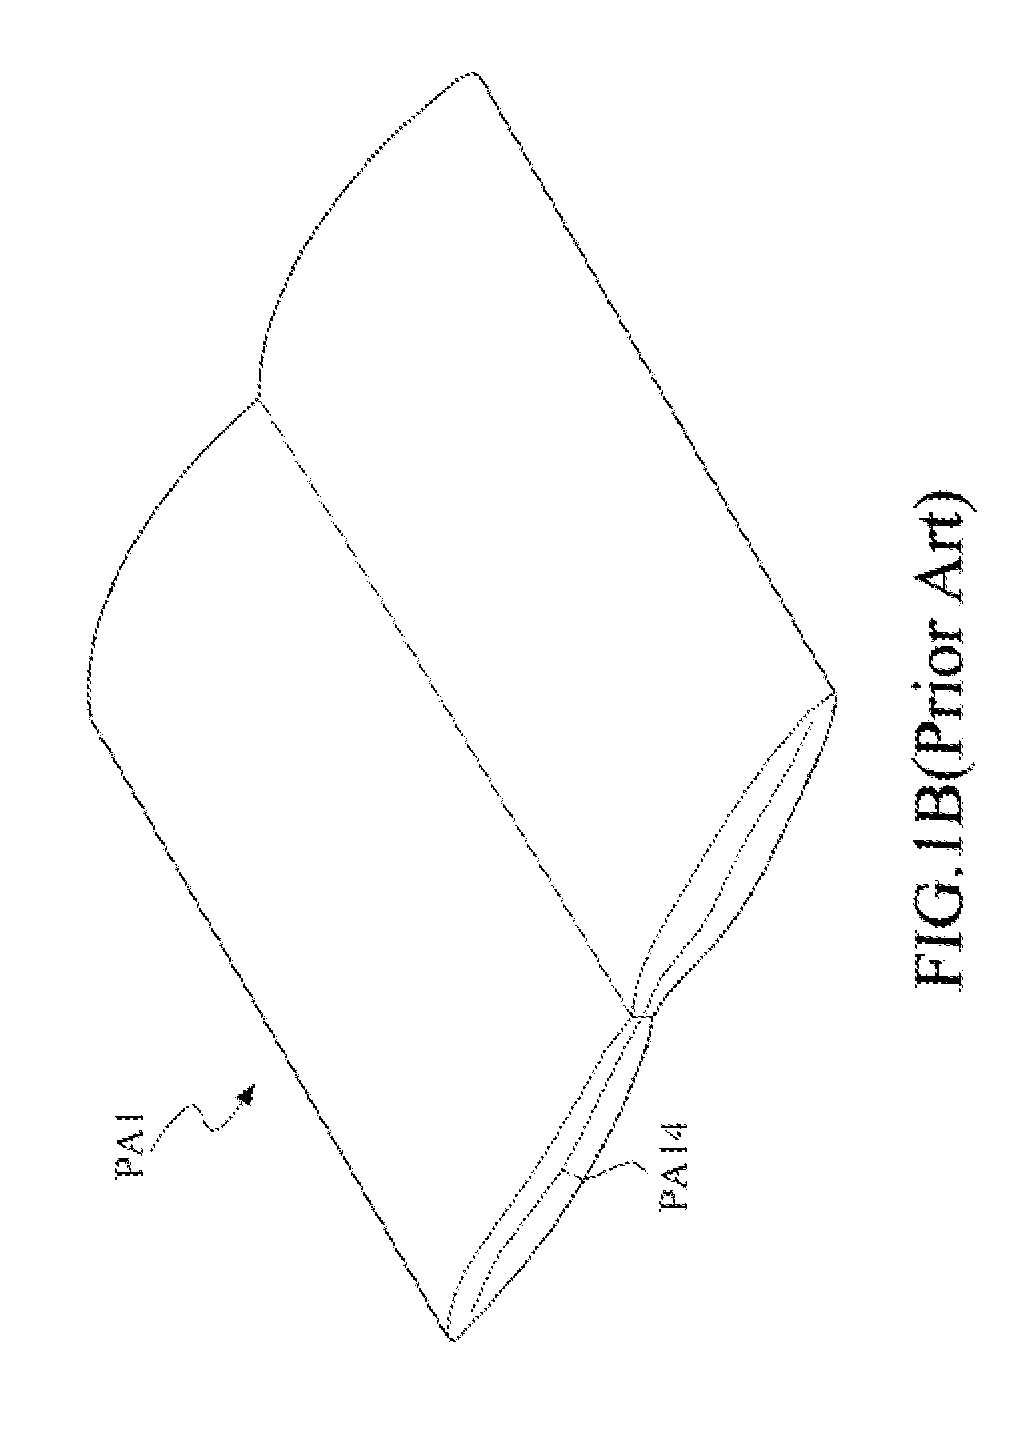 Composite warm-keeping textile structure and method for manufacturing the same